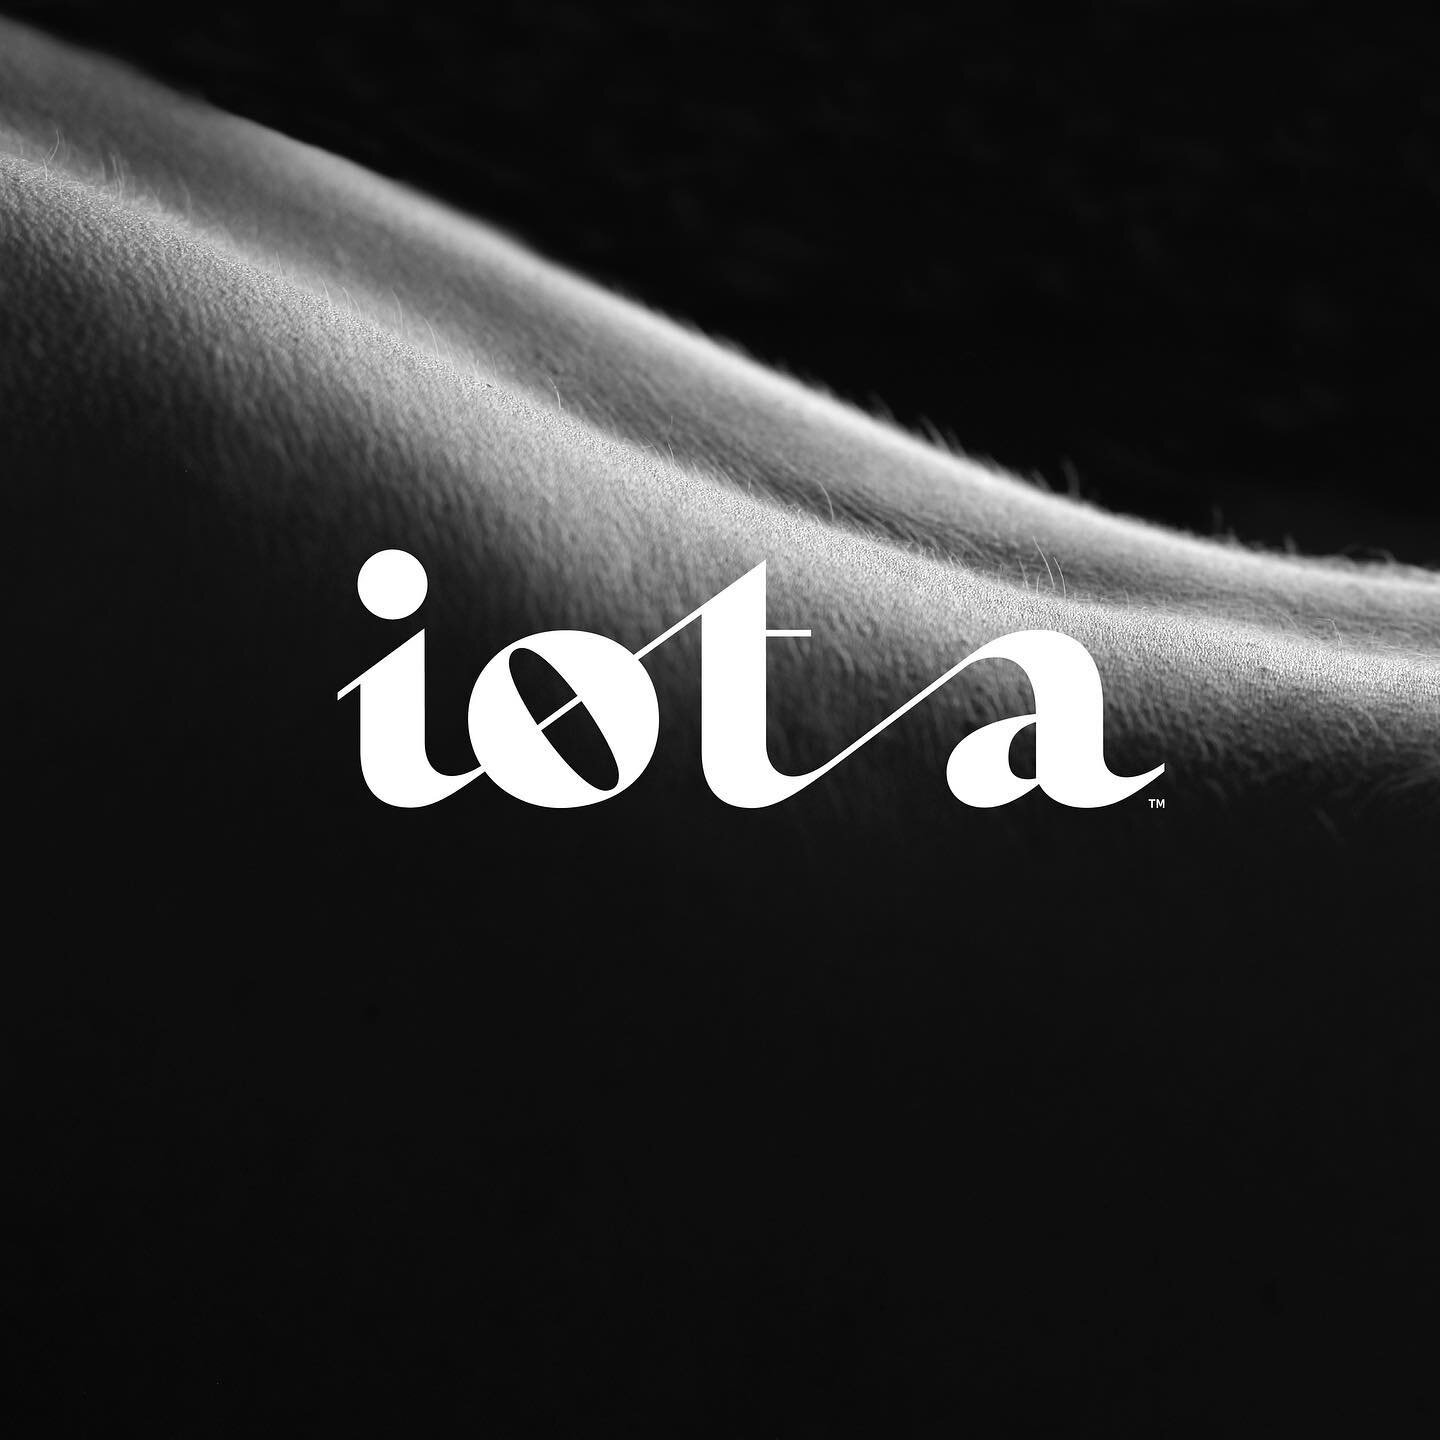 Introducing @iotabody - the first Nutritional Bodycare brand, available now at iotabody.com 

Brand Naming, Brand Identity &amp; Packaging Design by @rooknyc